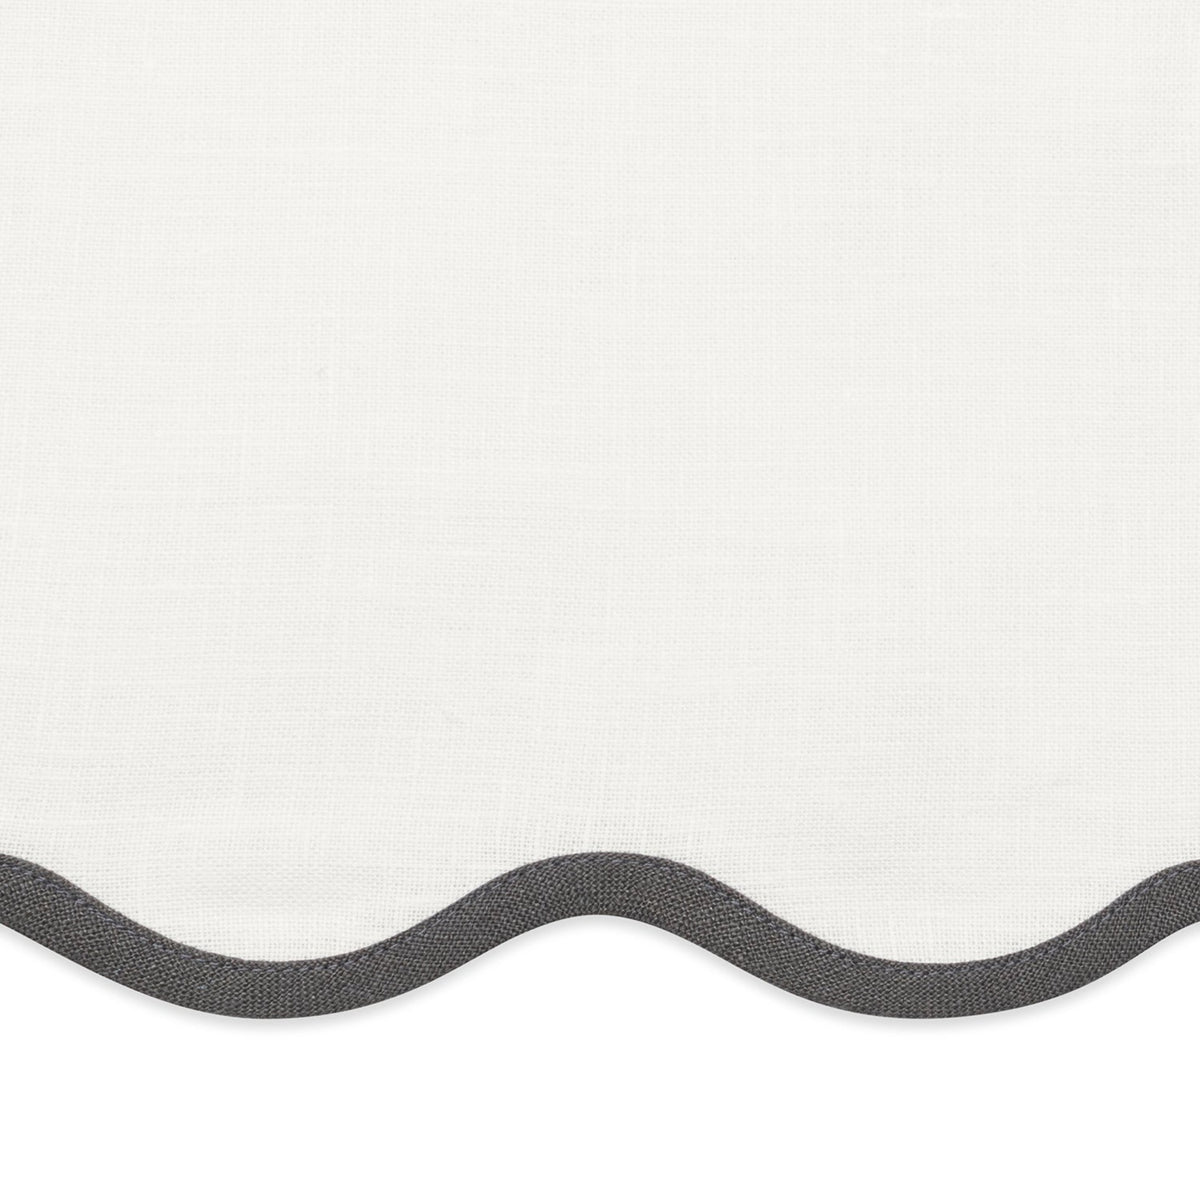 Swatch Sample of Matouk Scallop Edge Table Linens in Smoke Grey Color